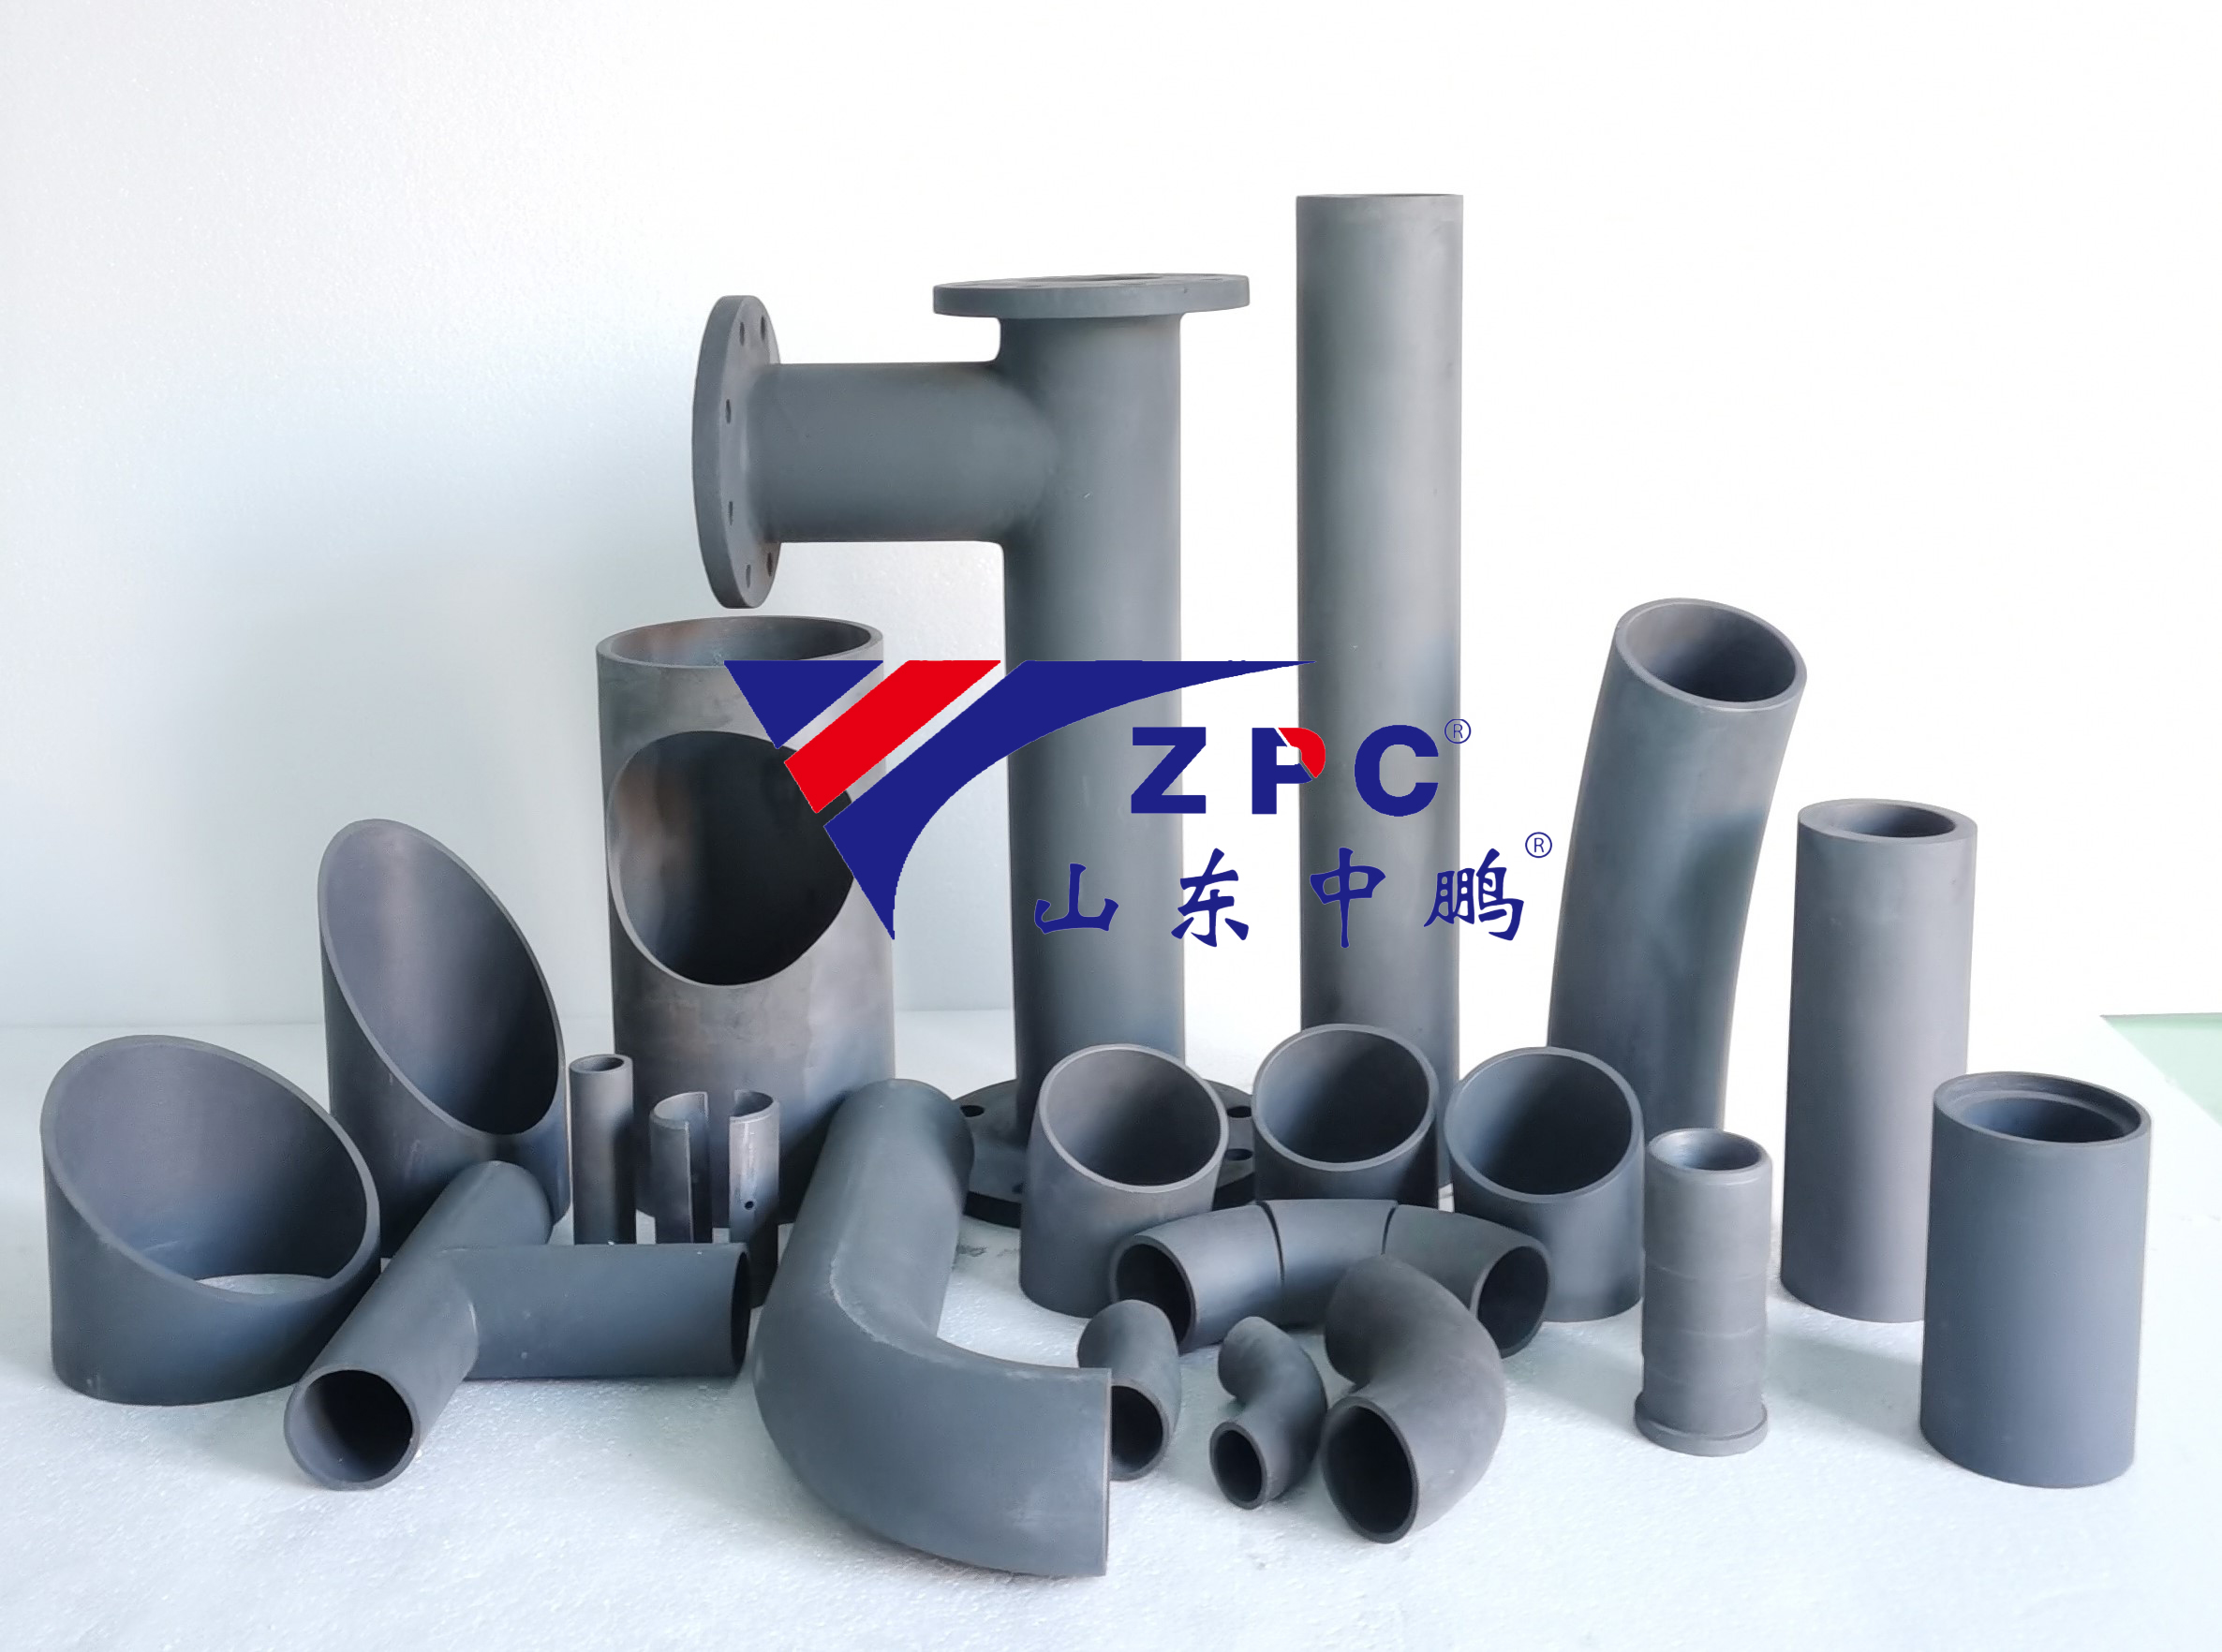 Silicon carbide ceramic pipe, cylinder, cone, spigots, manufacturer, factory